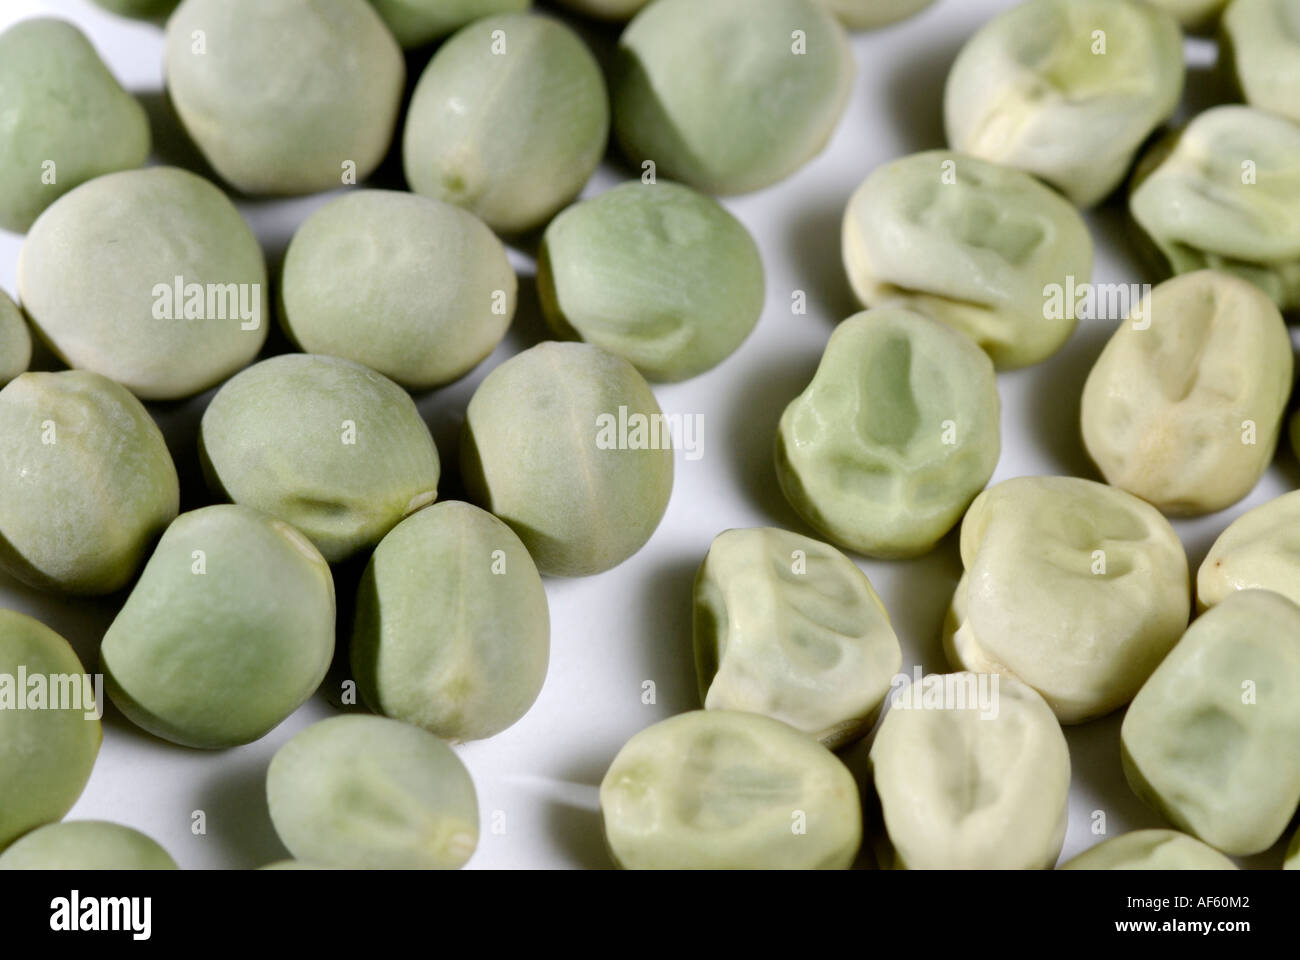 Green smooth and wrinkled pea seeds, traits Gregor Mendel studied in his genetics heredity experiments. Stock Photo